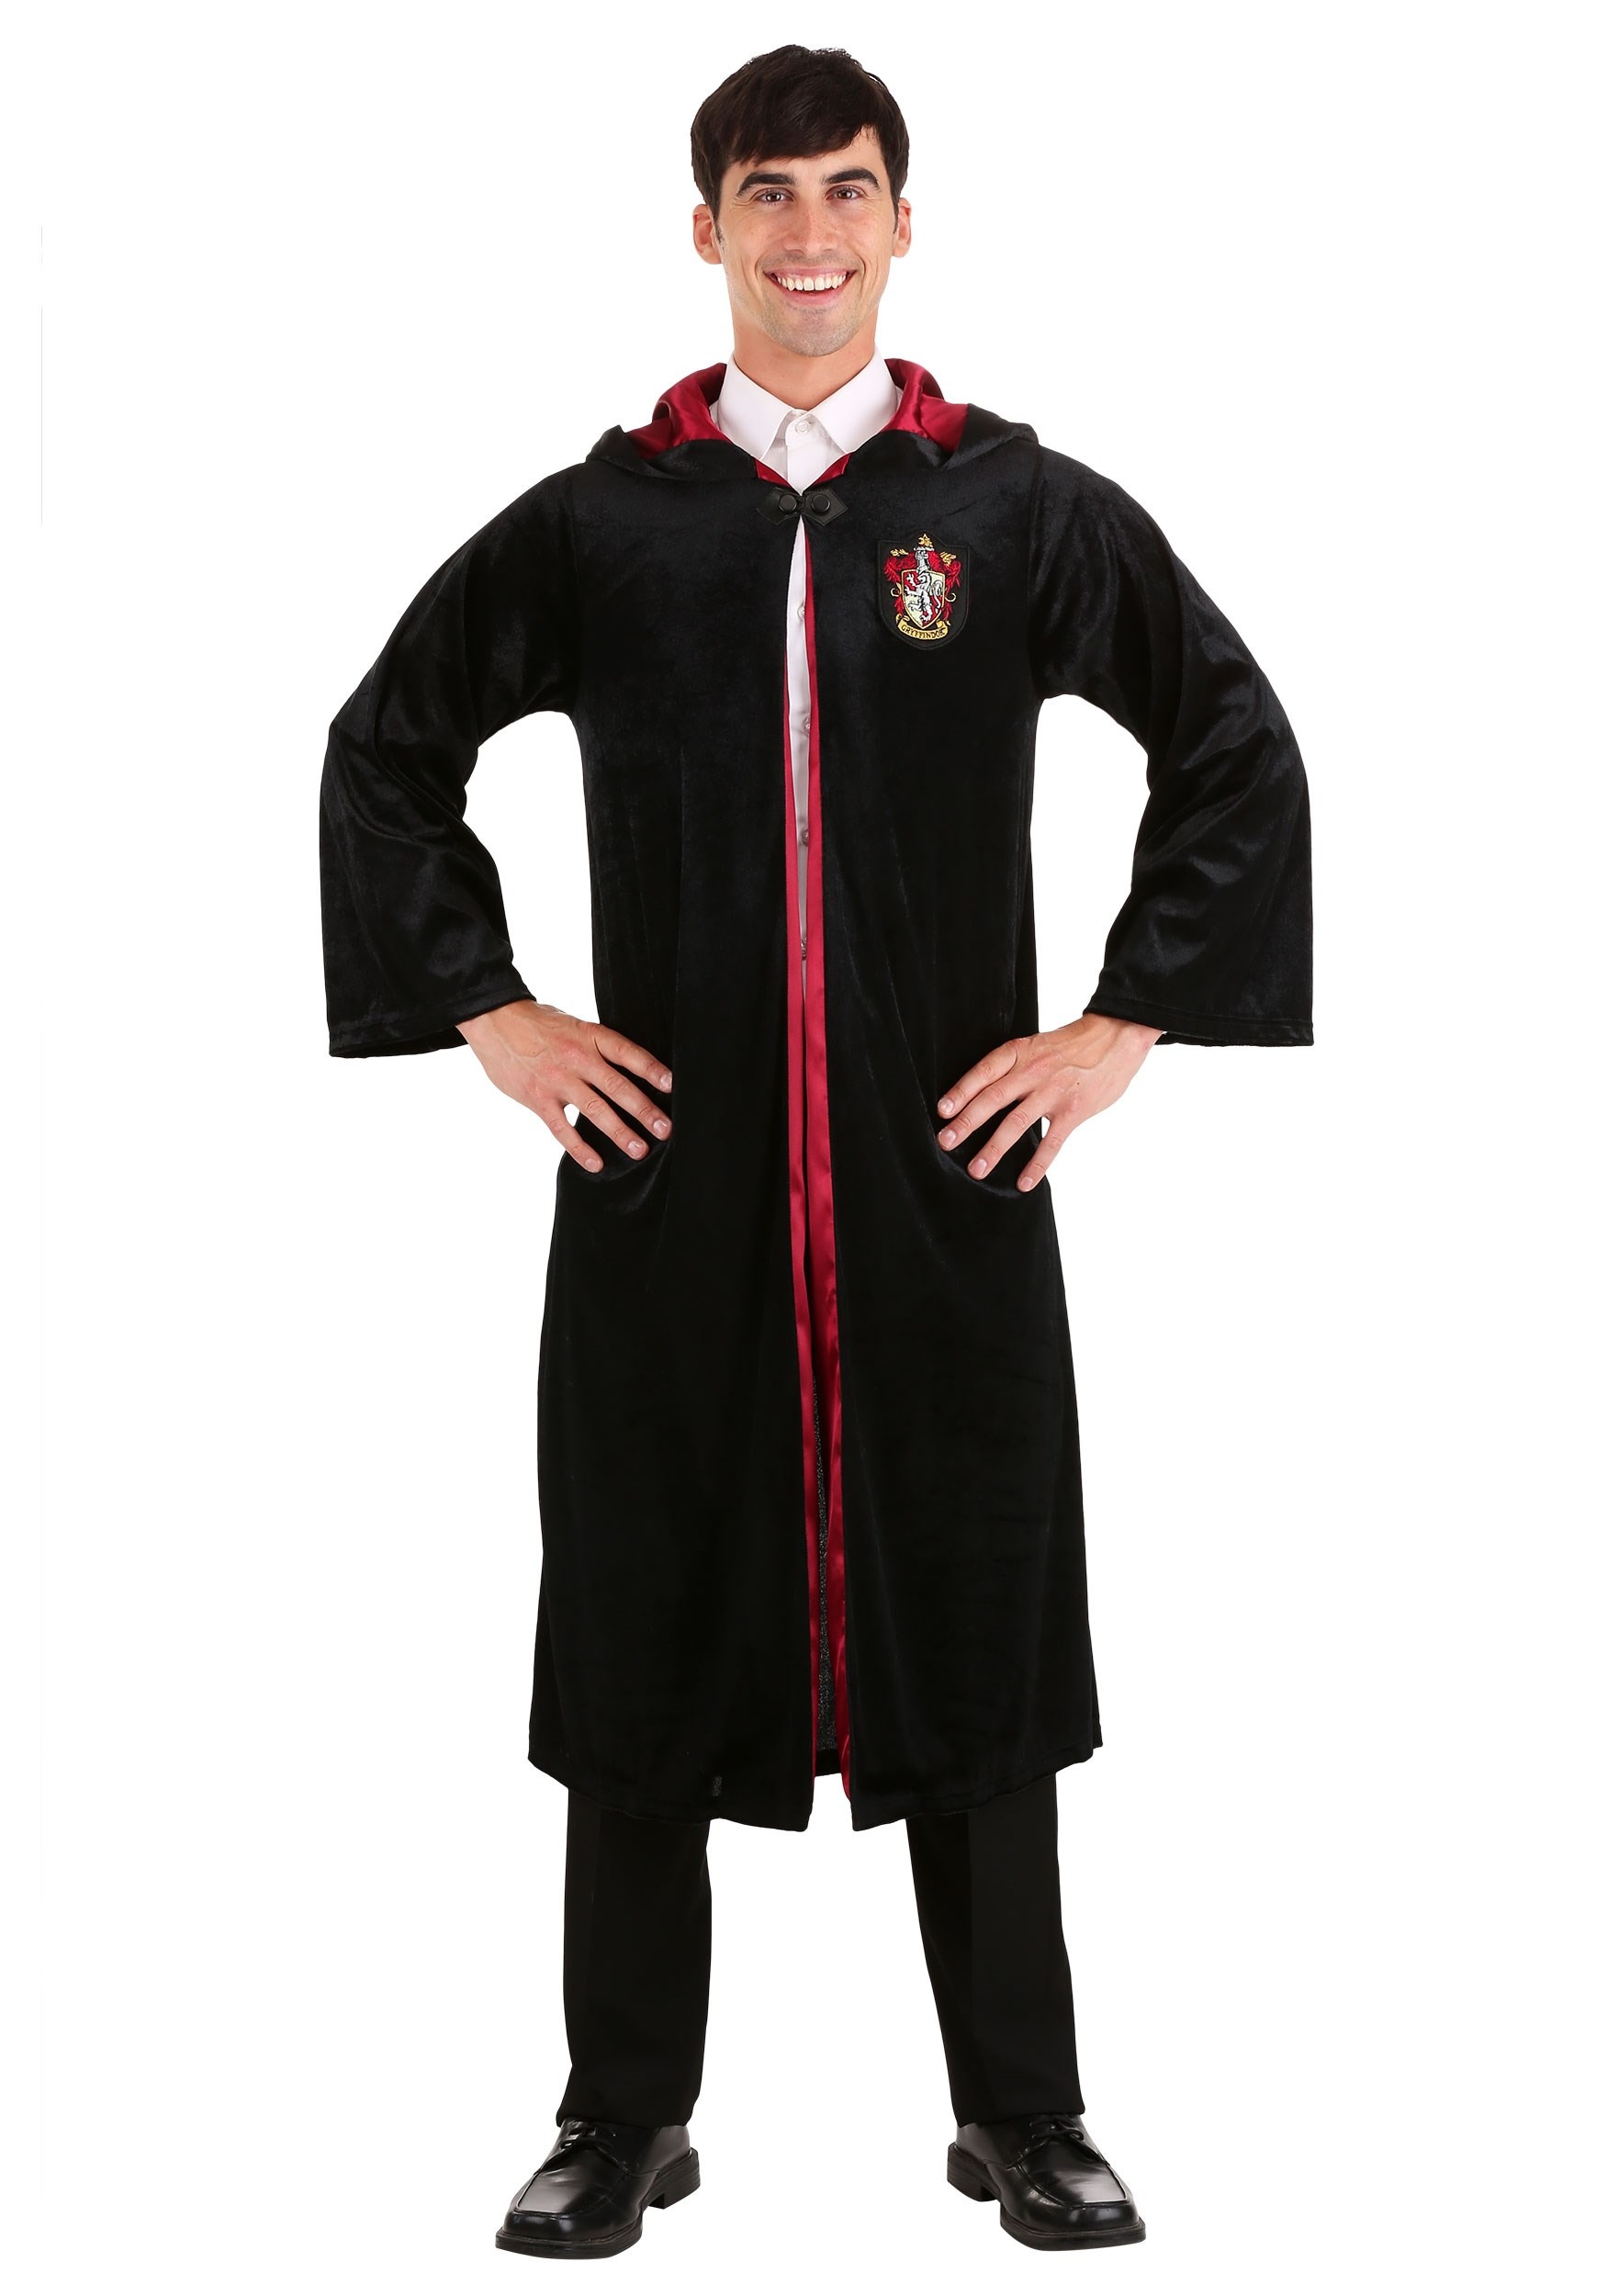 Photos - Fancy Dress Potter Jerry Leigh Harry  Deluxe Adult Gryffindor Robe Costume Black/Re 